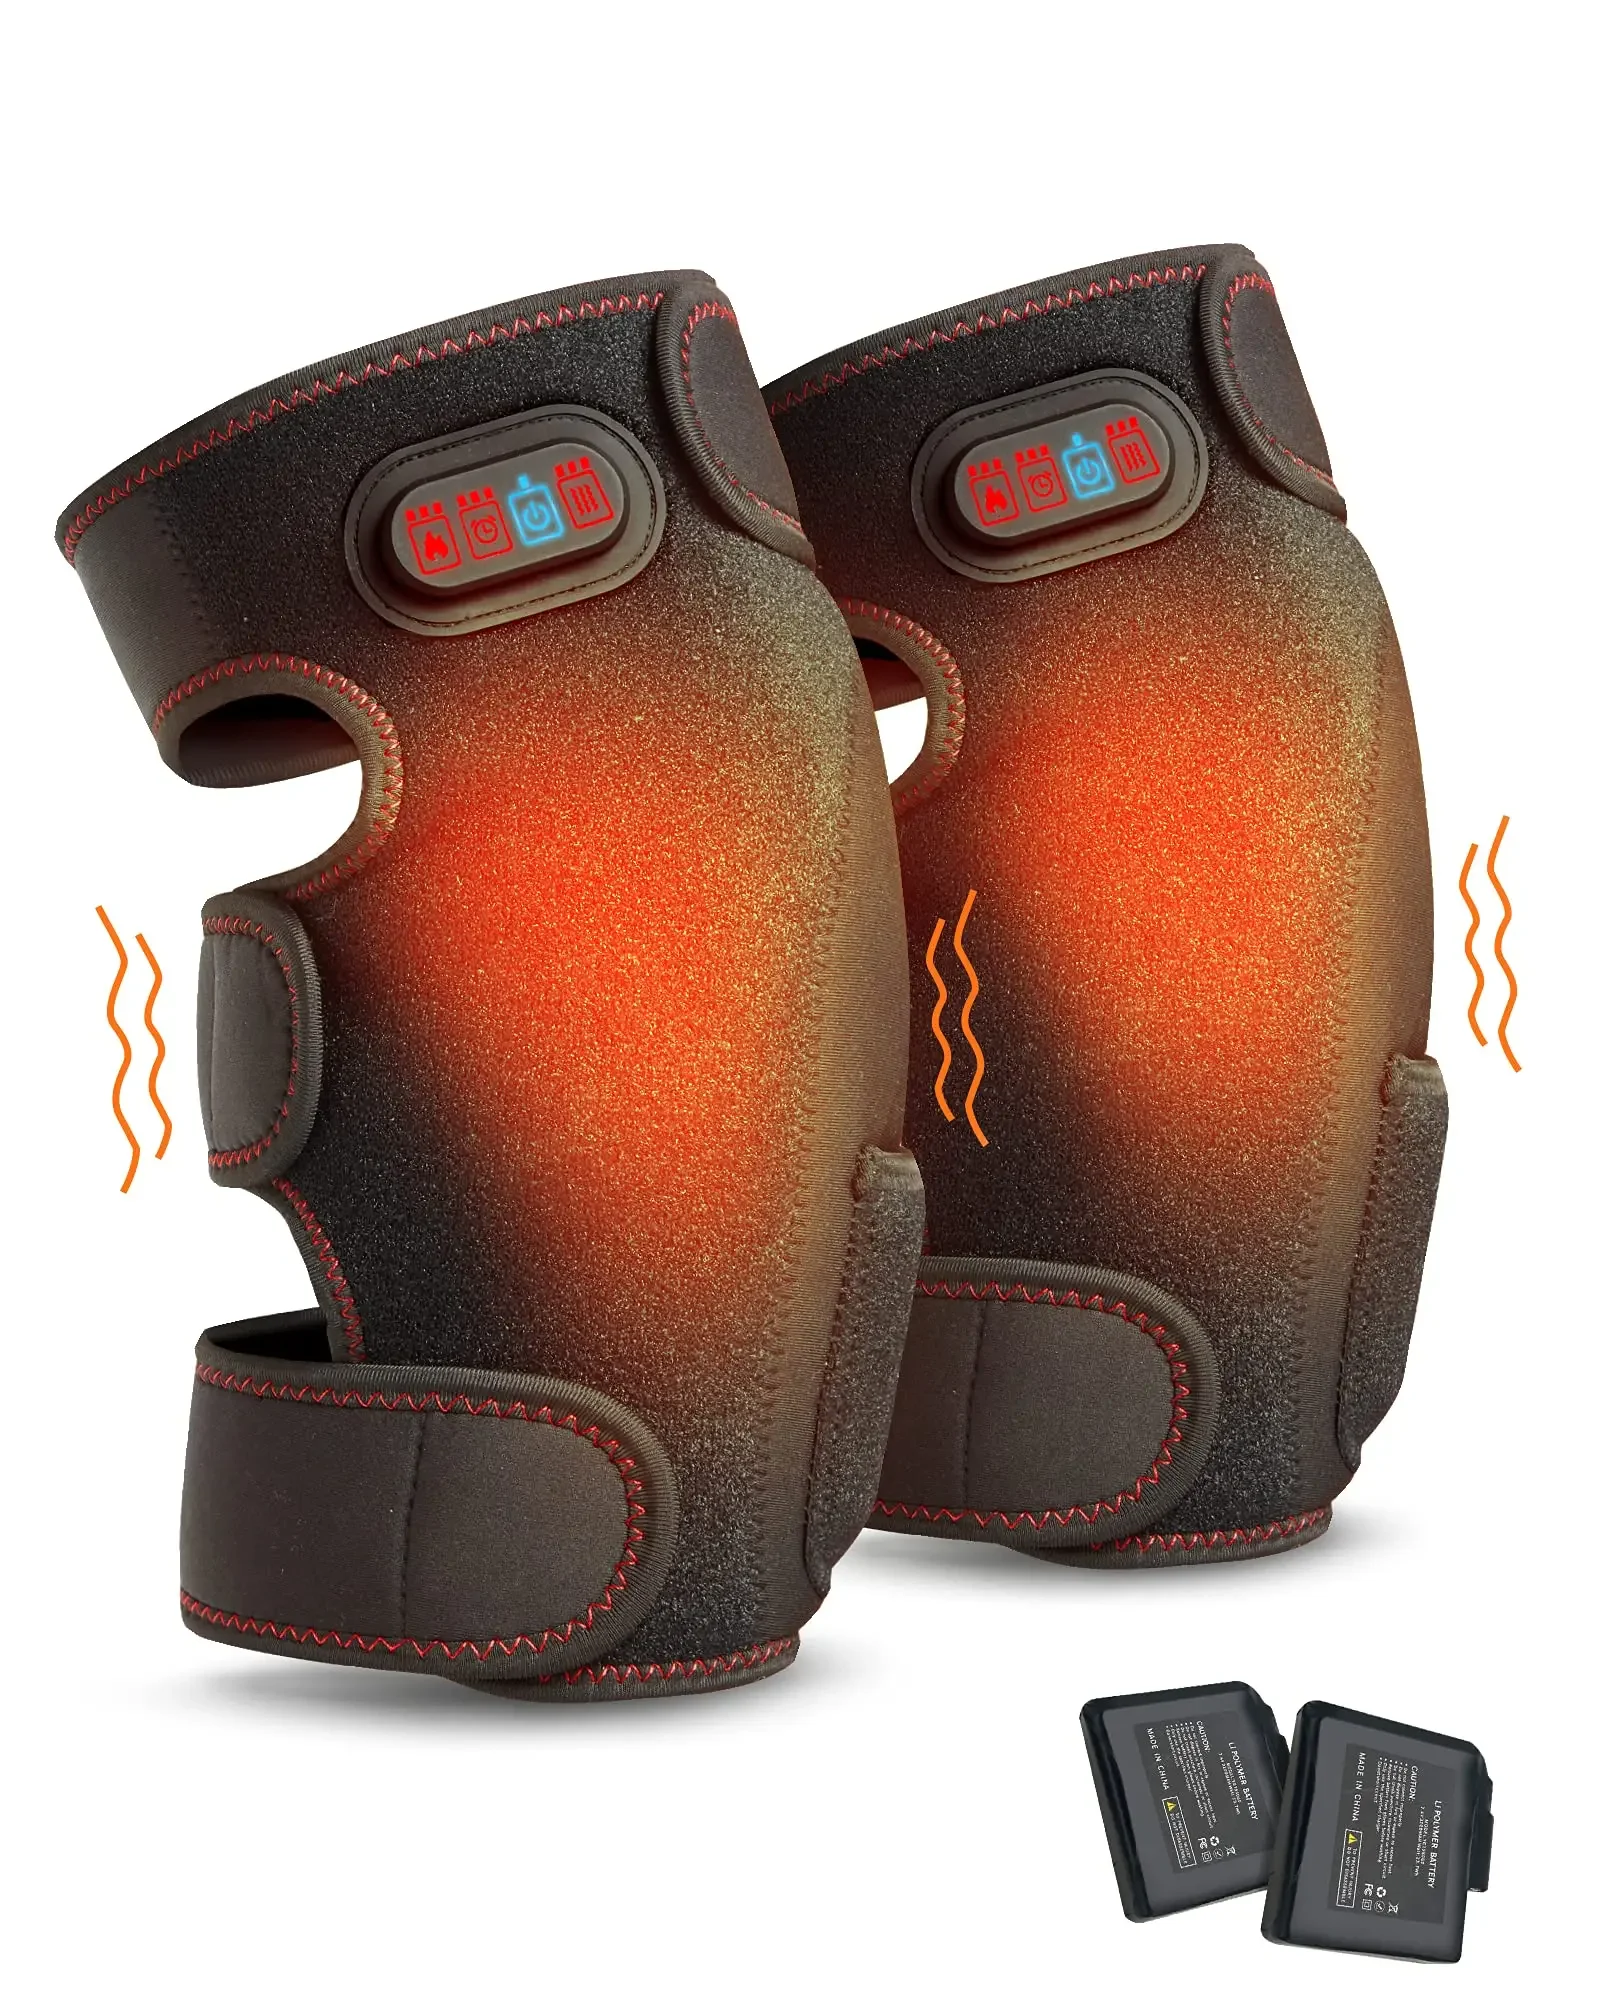 Heated Knee Brace Wrap - Battery Powered Knee Heating Pad Vibration Massager for Knee Pain Relief (1 Pair) smart electric heated gloves ski waterproof aa rechargeable battery self heating 4 fingers